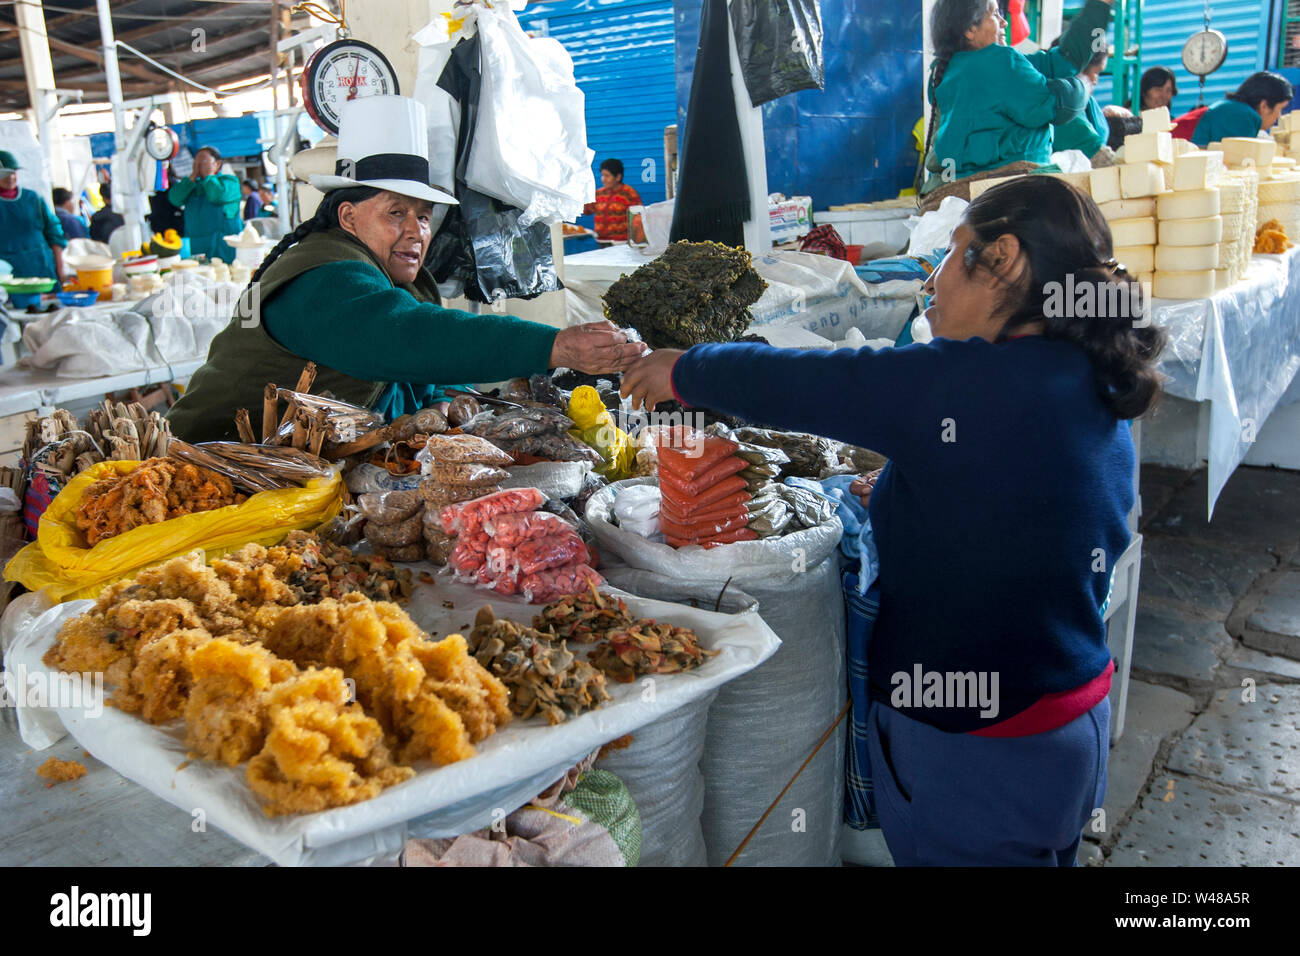 A customer is served by a shopkeeper at a stall in the undercover market place at Cusco in Peru. Stock Photo